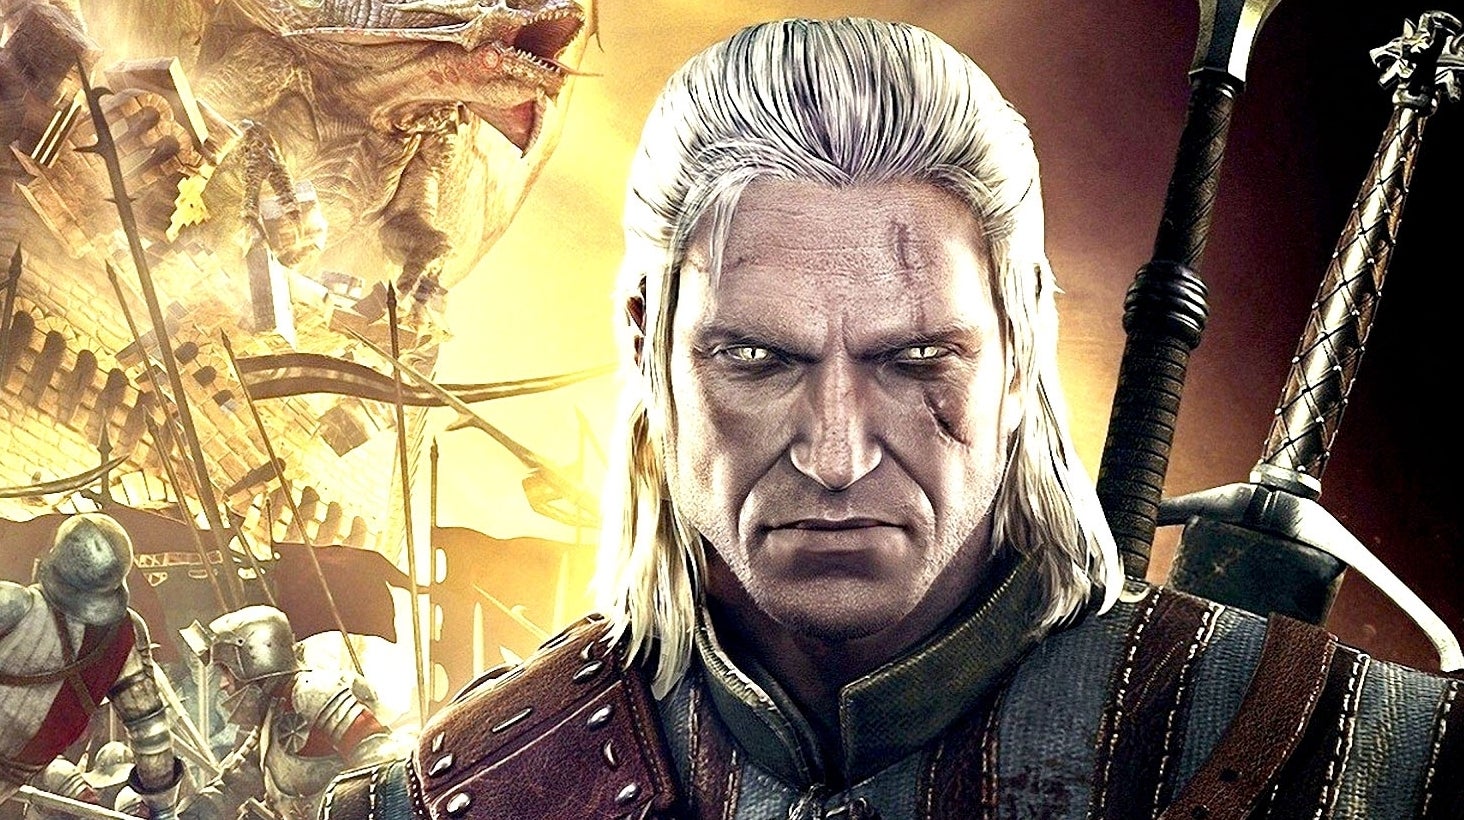 Image for 2020 Vision: The Witcher 2 was a stunning tech achievement that still looks great today